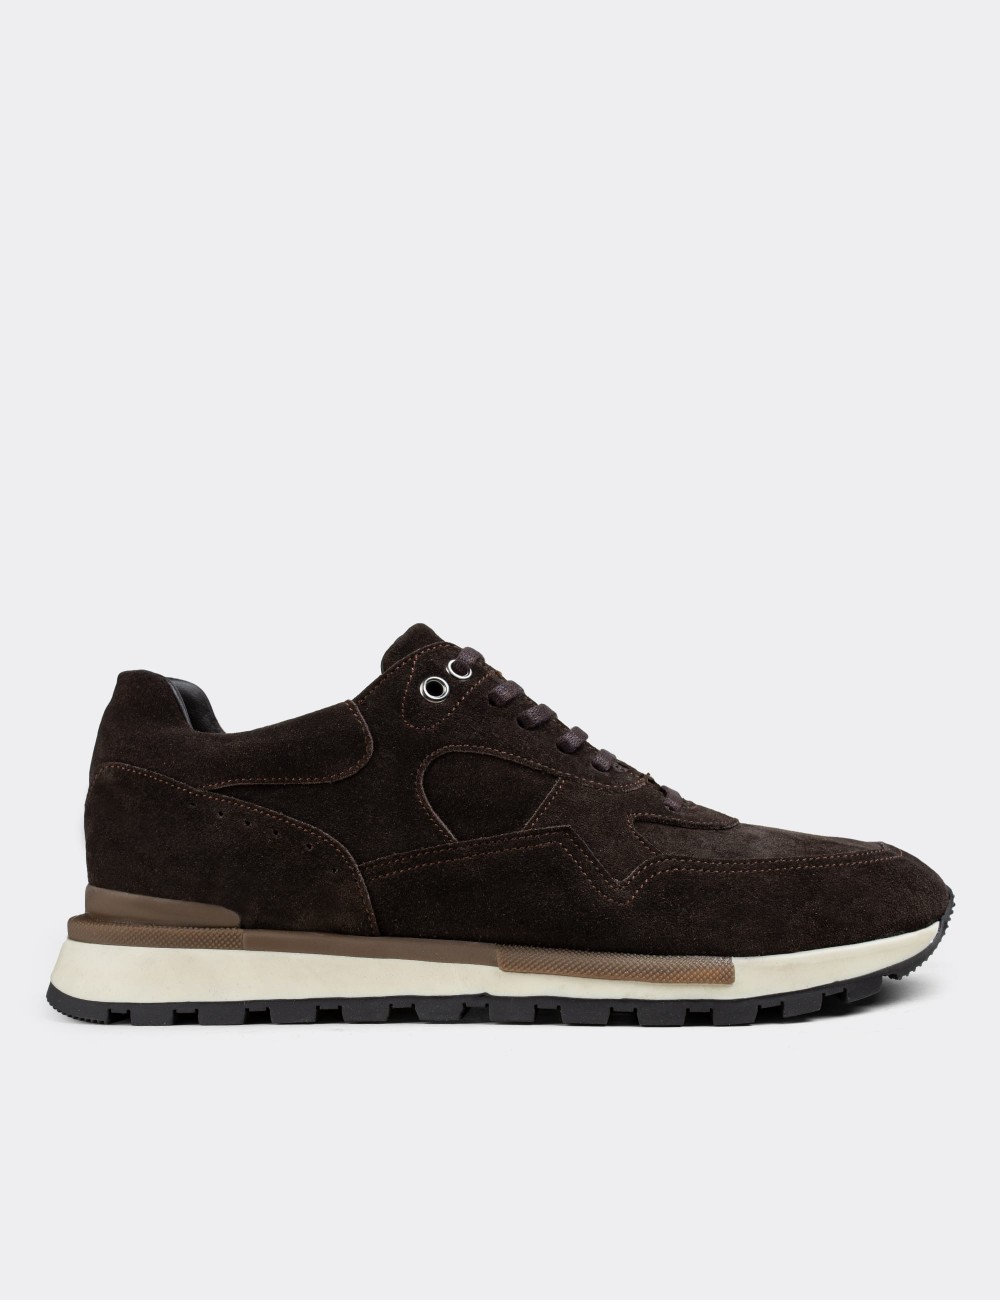 Brown Suede Leather Sneakers - 01818MKHVT01